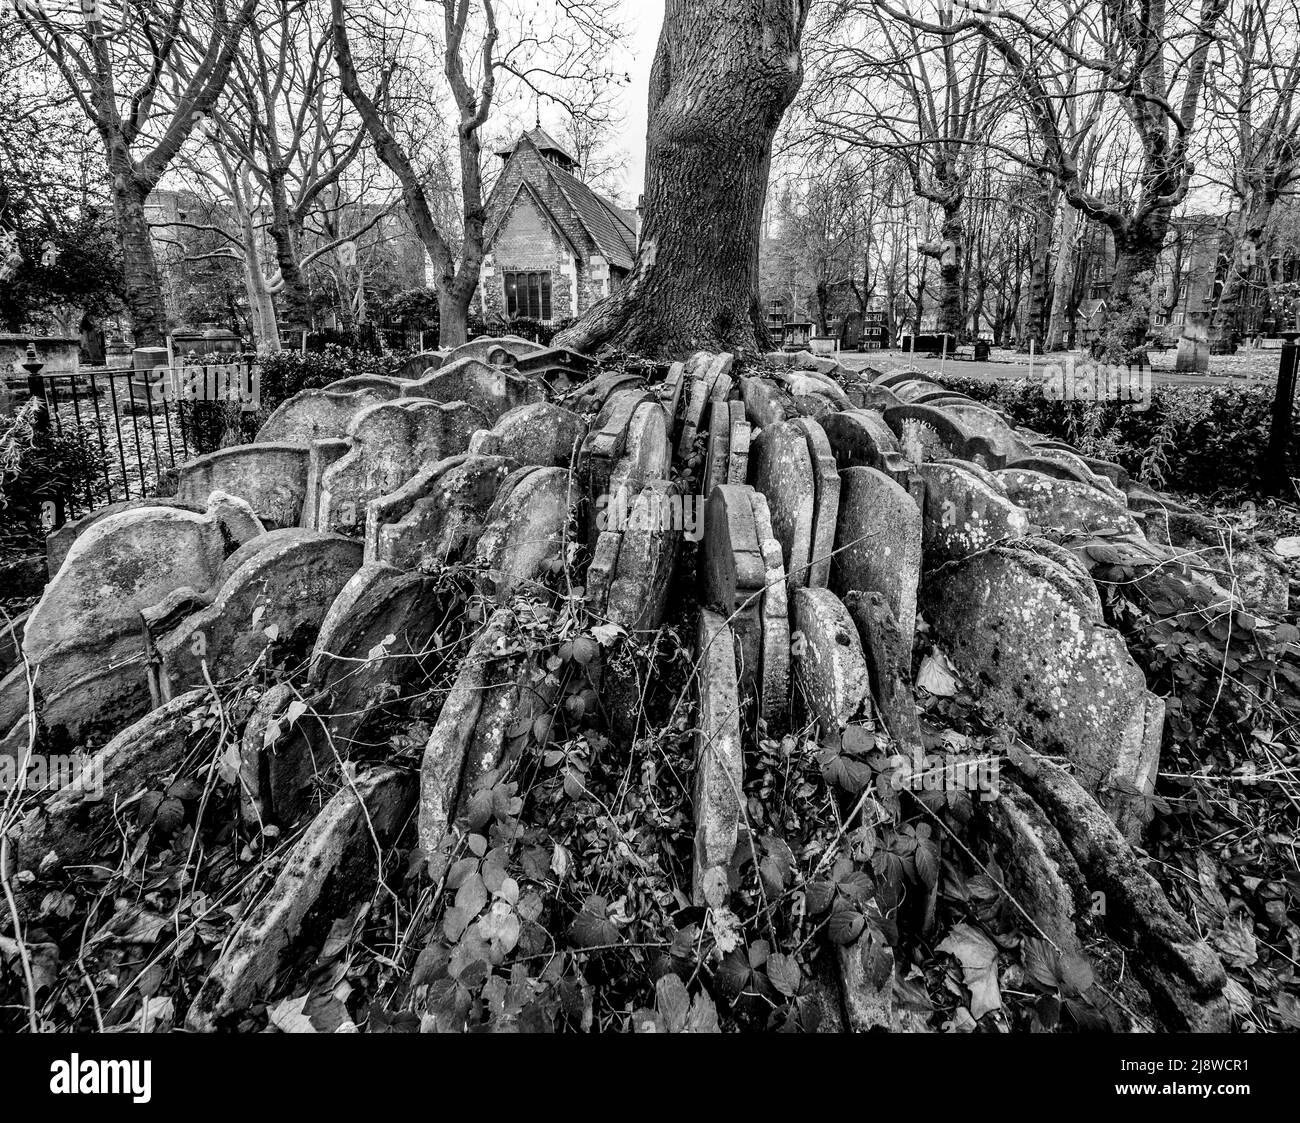 The Hardy Tree.  An Ash tree encircled with graves stones, situated in graveyard of St Pancras Old church. Stock Photo